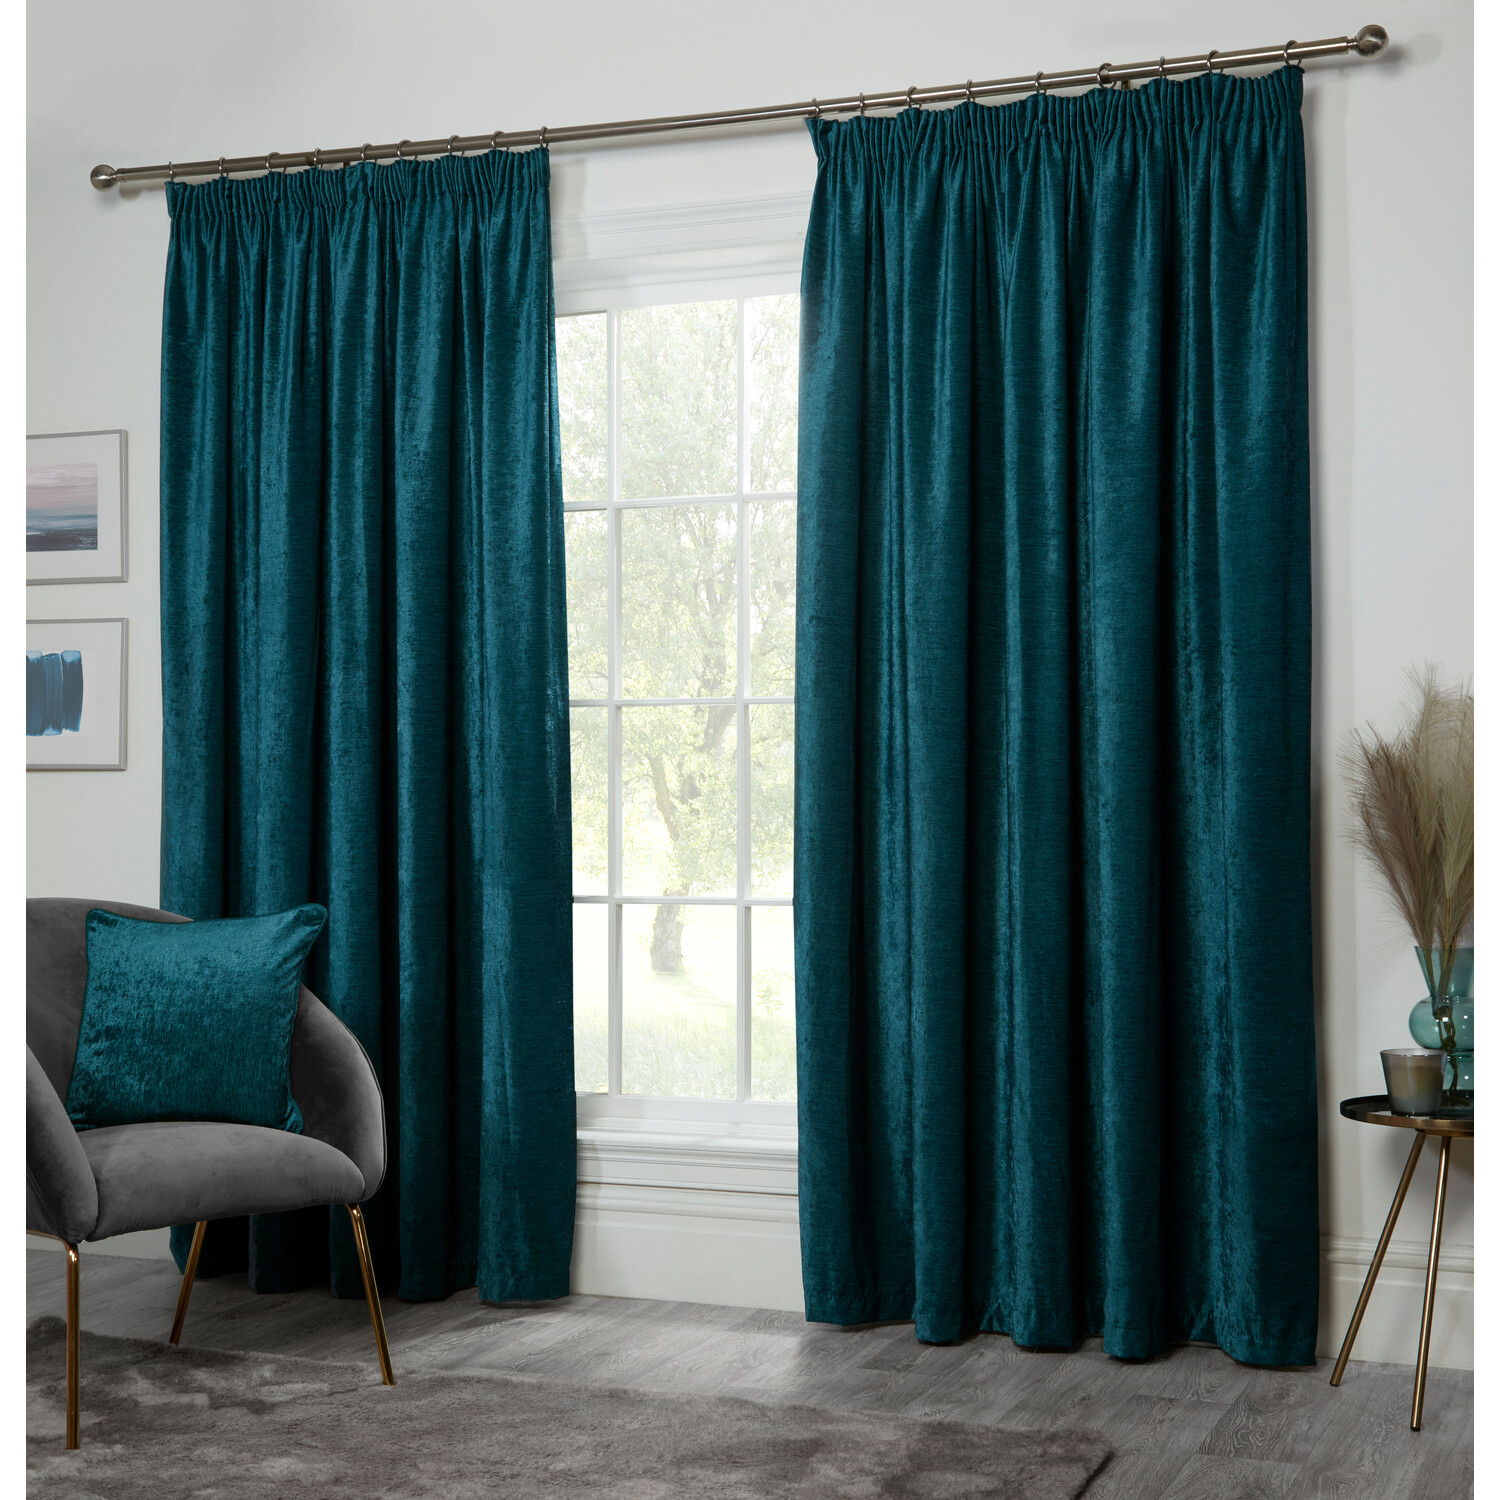 Divante Teal Chenille Taped Curtains 229 x 229cm Image 2